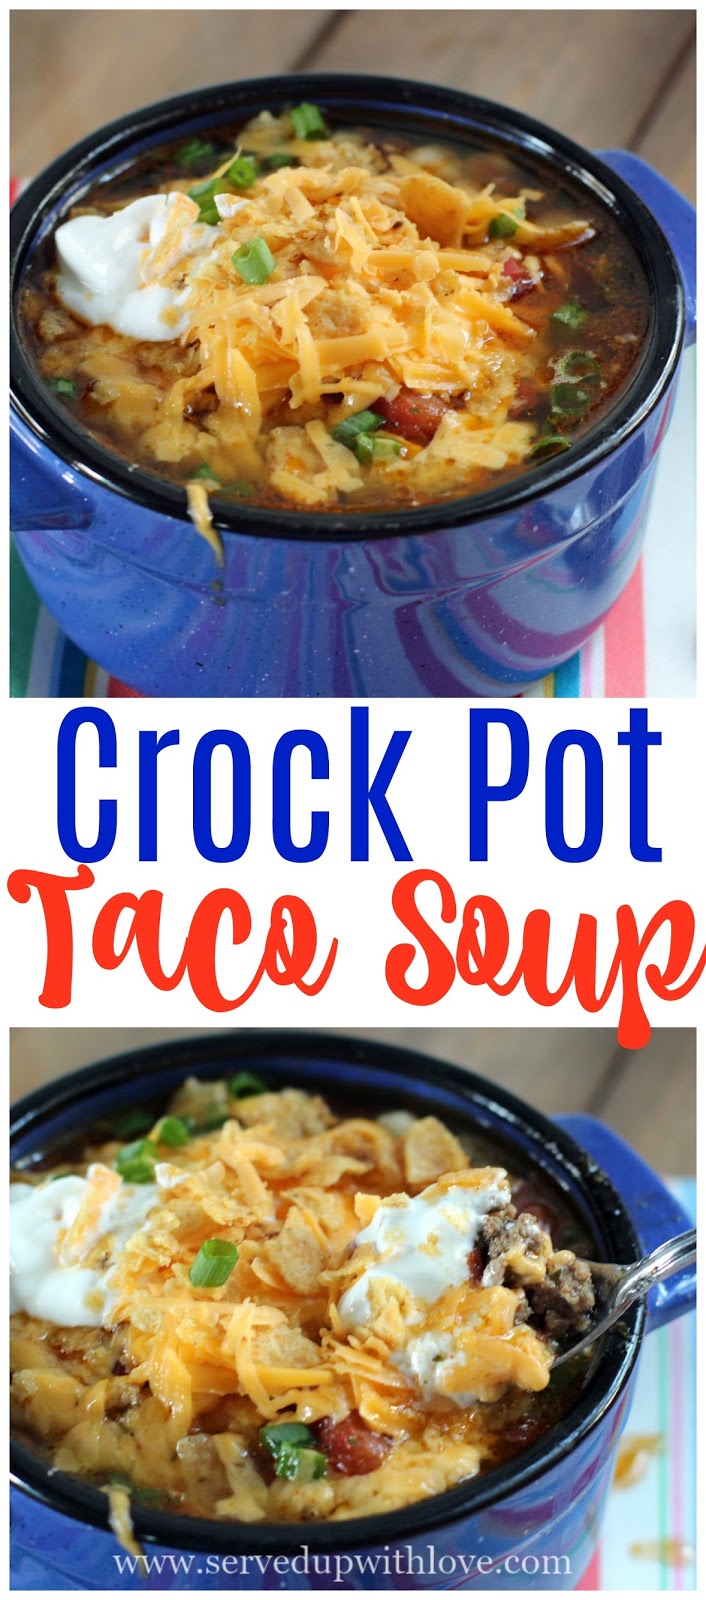 Served Up With Love: Crock Pot Taco Soup